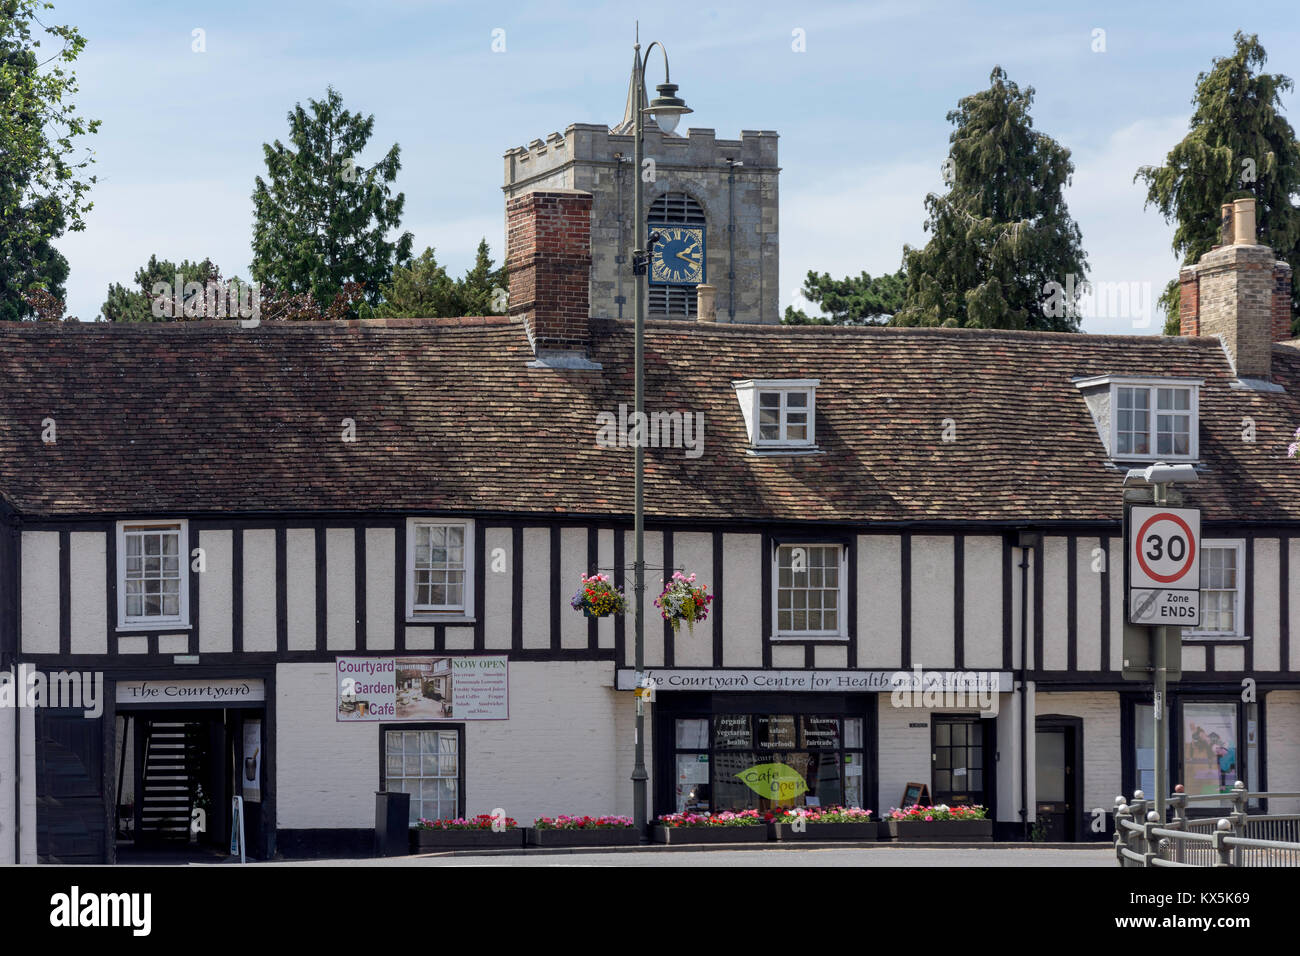 Timber-framed Courtyard showing St.Andrew's Church, High Street, Biggleswade, Bedfordshire, England, United Kingdom Stock Photo